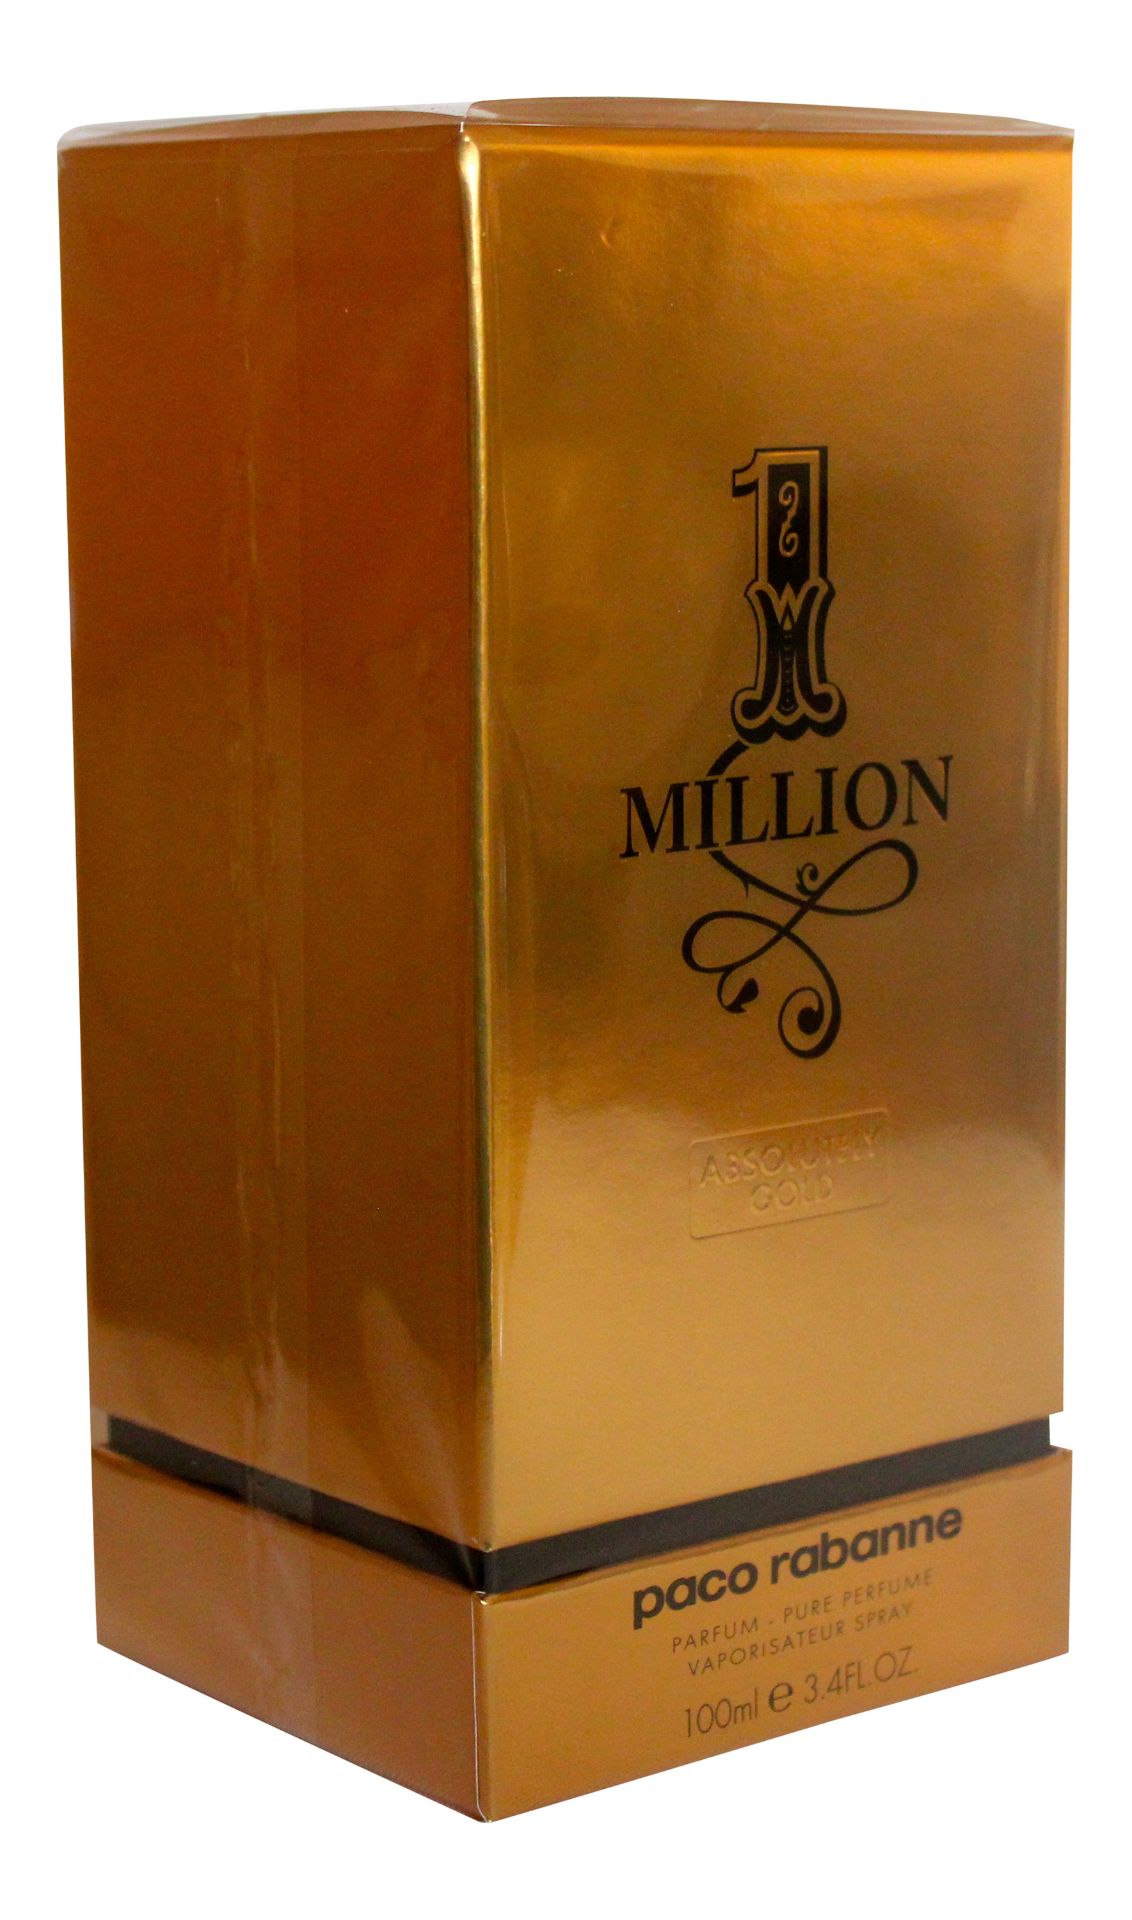 Paco Rabanne 1 Million Absolutely Gold 100ml Pure Perfume Spray for Men x 1 Unit